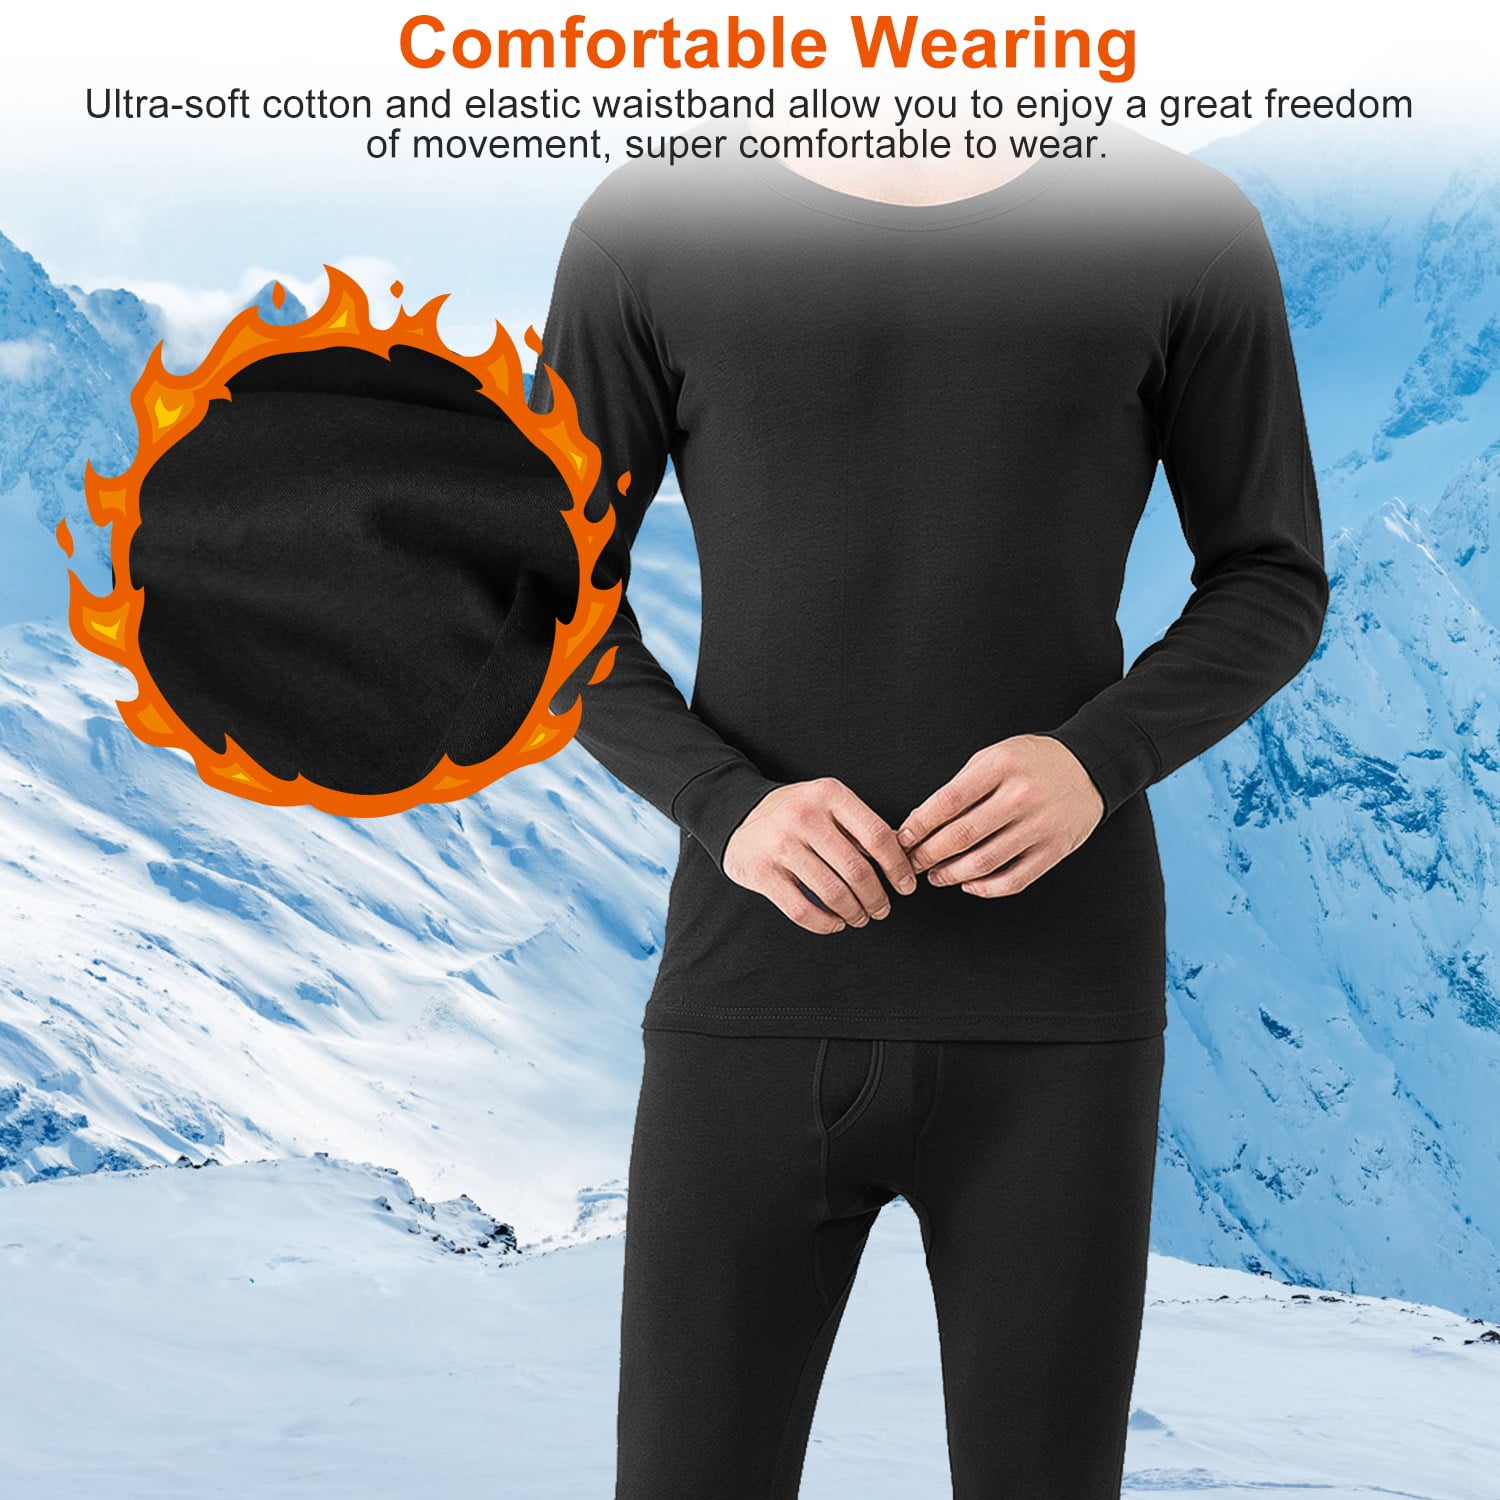 Is It Safe And Comfortable To Wear Thermal Cloths?